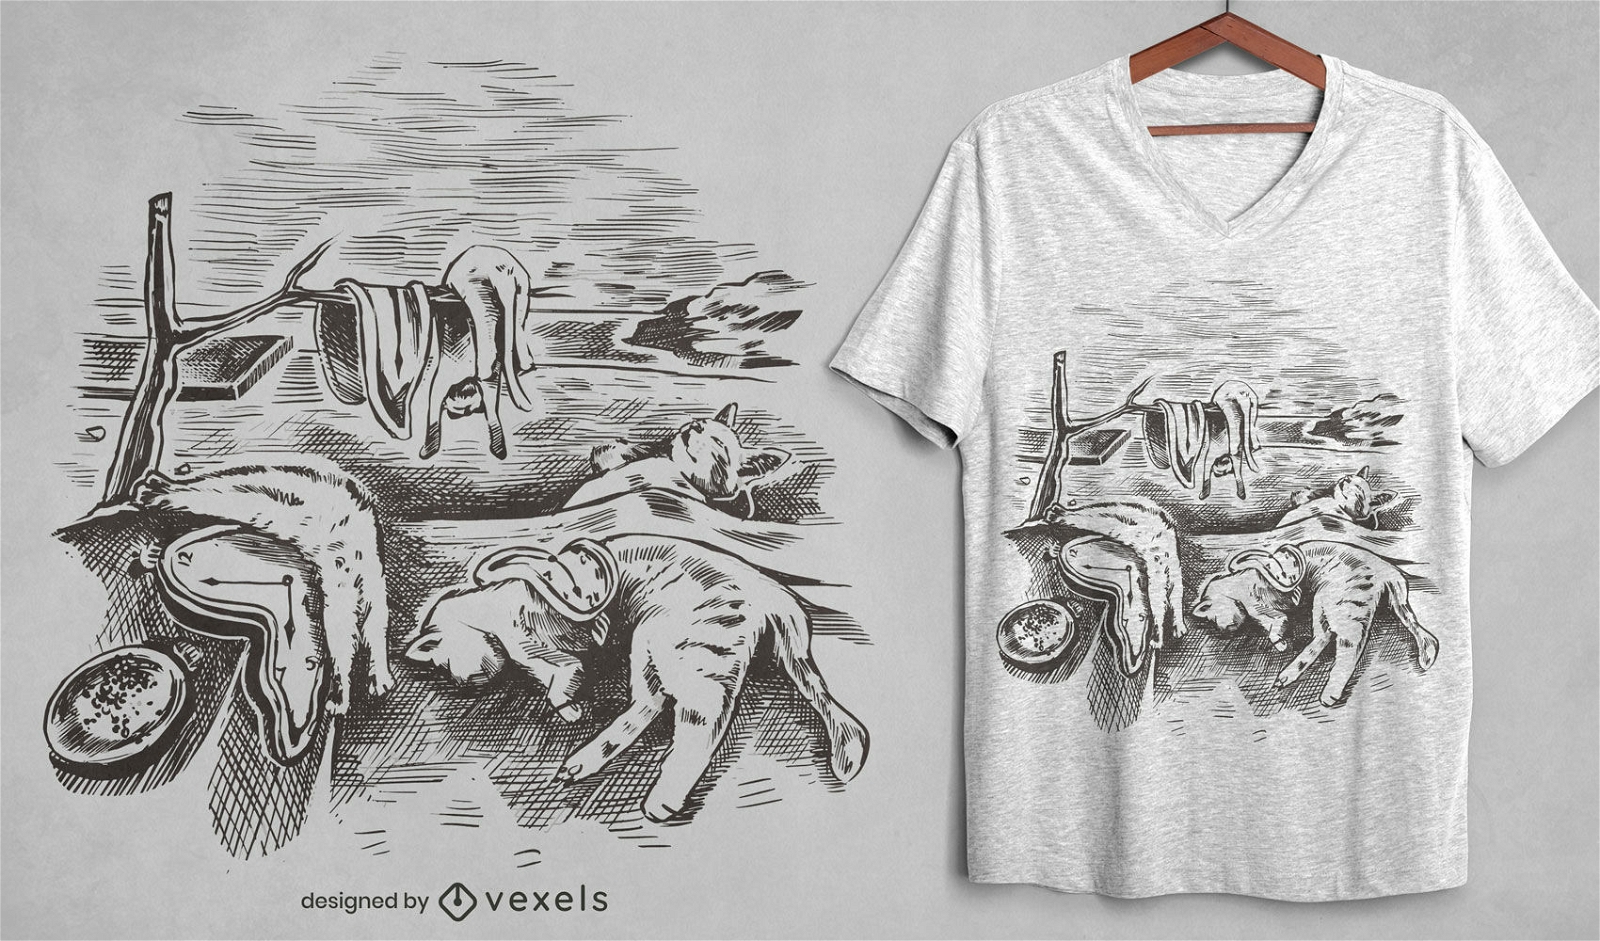 Watch and cats painting parody t-shirt design